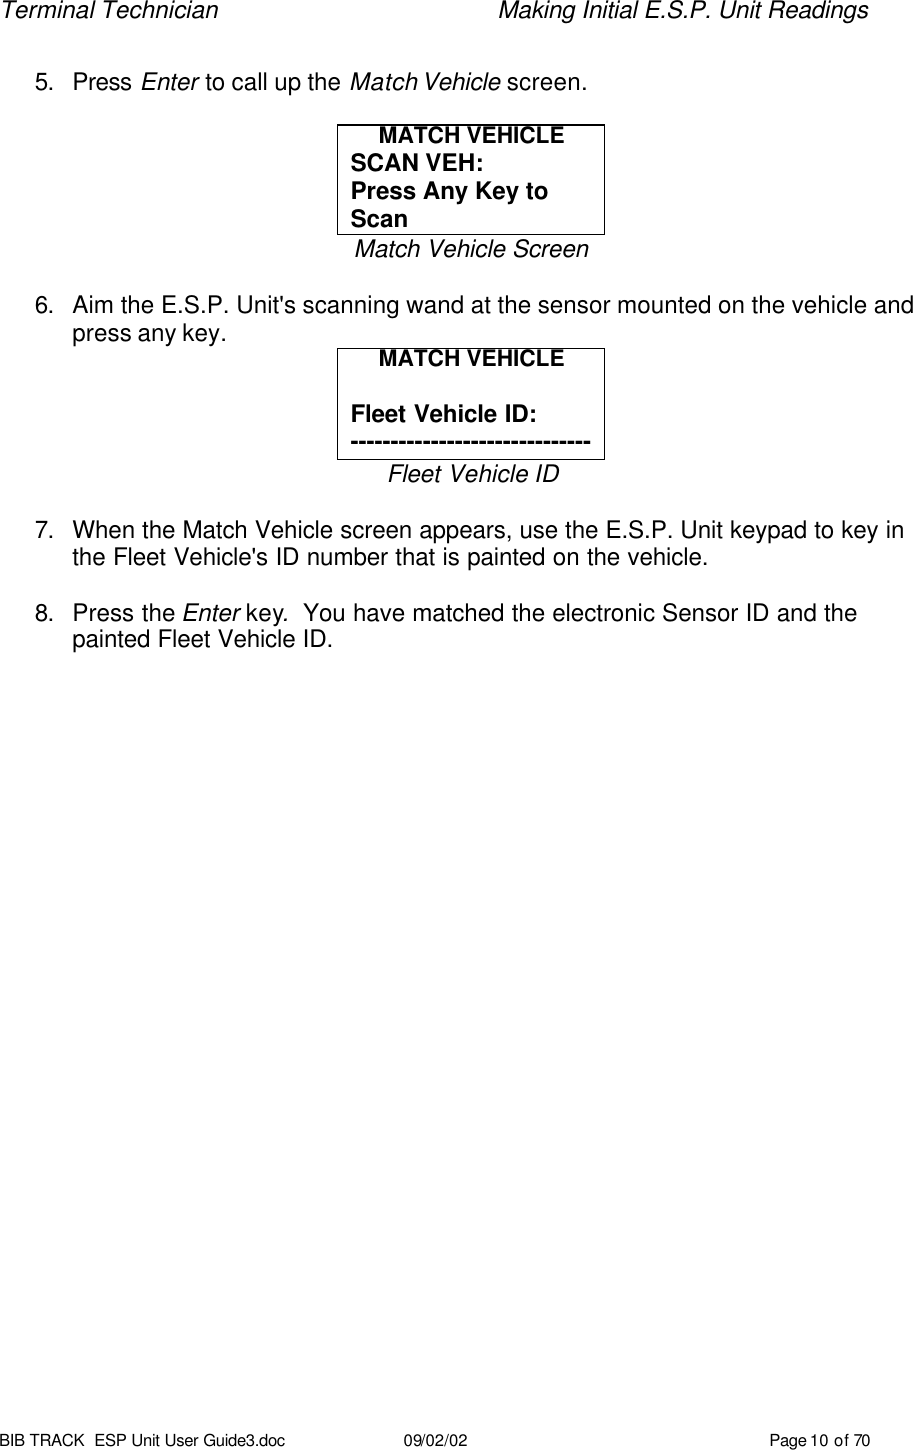 Terminal Technician    Making Initial E.S.P. Unit Readings BIB TRACK  ESP Unit User Guide3.doc 09/02/02 Page 10 of 70  5. Press Enter to call up the Match Vehicle screen.  MATCH VEHICLE SCAN VEH:  Press Any Key to Scan Match Vehicle Screen  6. Aim the E.S.P. Unit&apos;s scanning wand at the sensor mounted on the vehicle and press any key. MATCH VEHICLE  Fleet Vehicle ID: ------------------------------ Fleet Vehicle ID  7. When the Match Vehicle screen appears, use the E.S.P. Unit keypad to key in the Fleet Vehicle&apos;s ID number that is painted on the vehicle.  8. Press the Enter key.  You have matched the electronic Sensor ID and the painted Fleet Vehicle ID.     